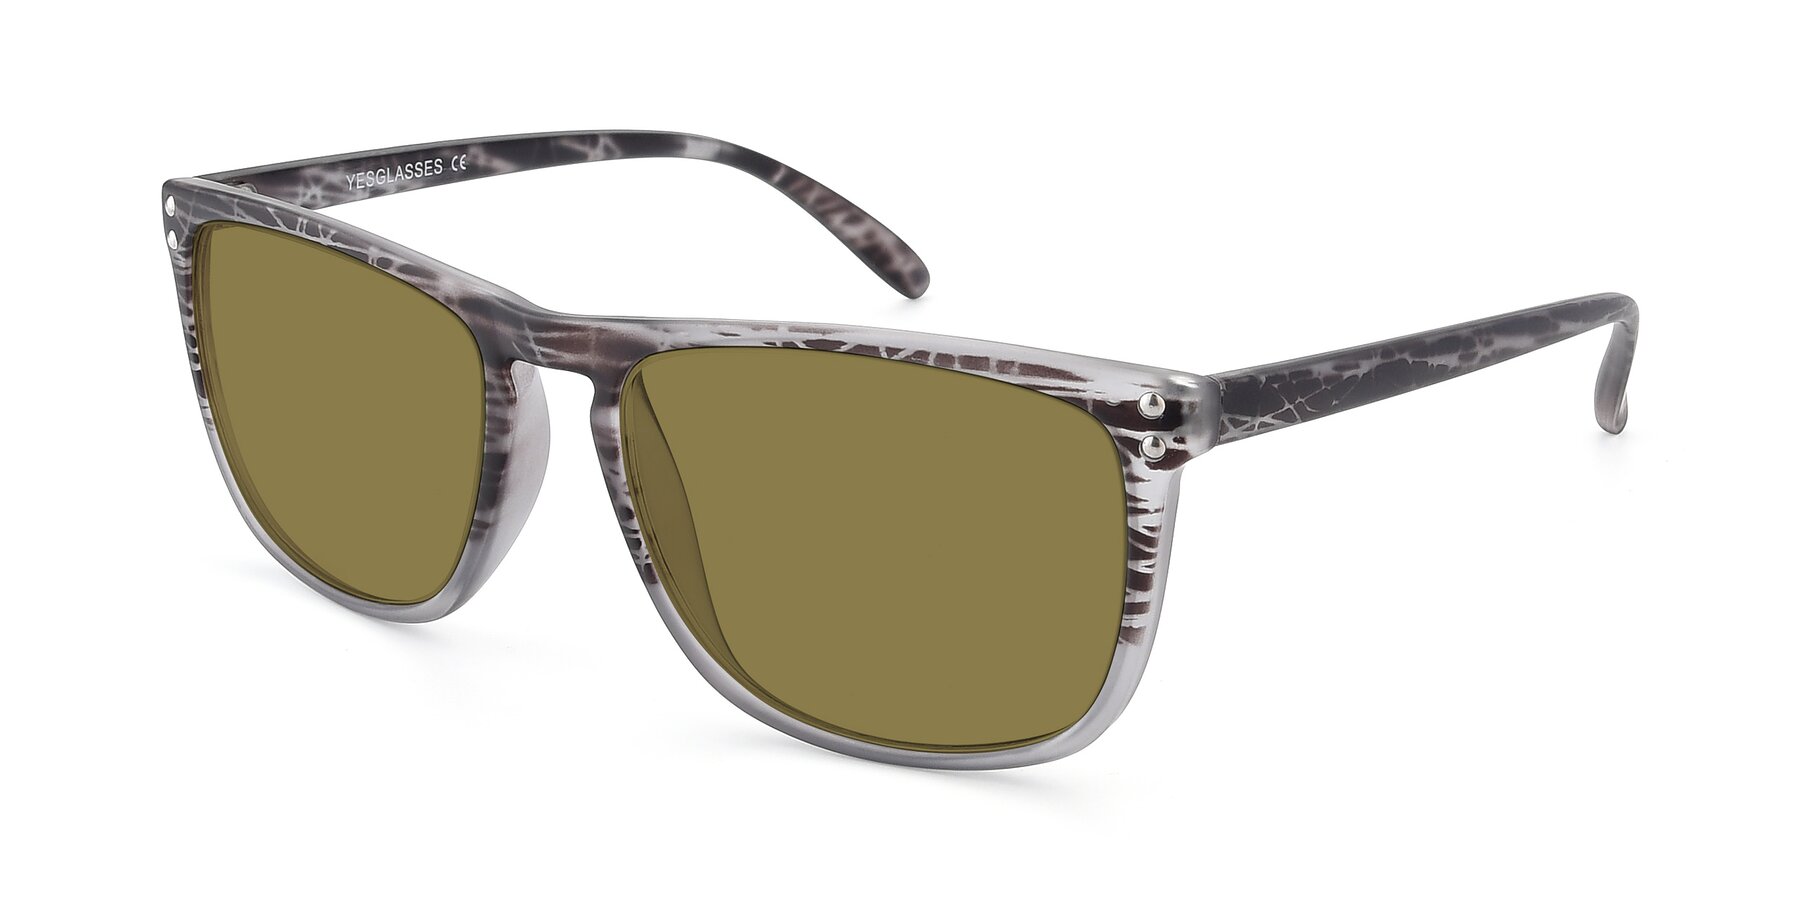 Angle of SSR411 in Translucent Floral Grey with Brown Polarized Lenses